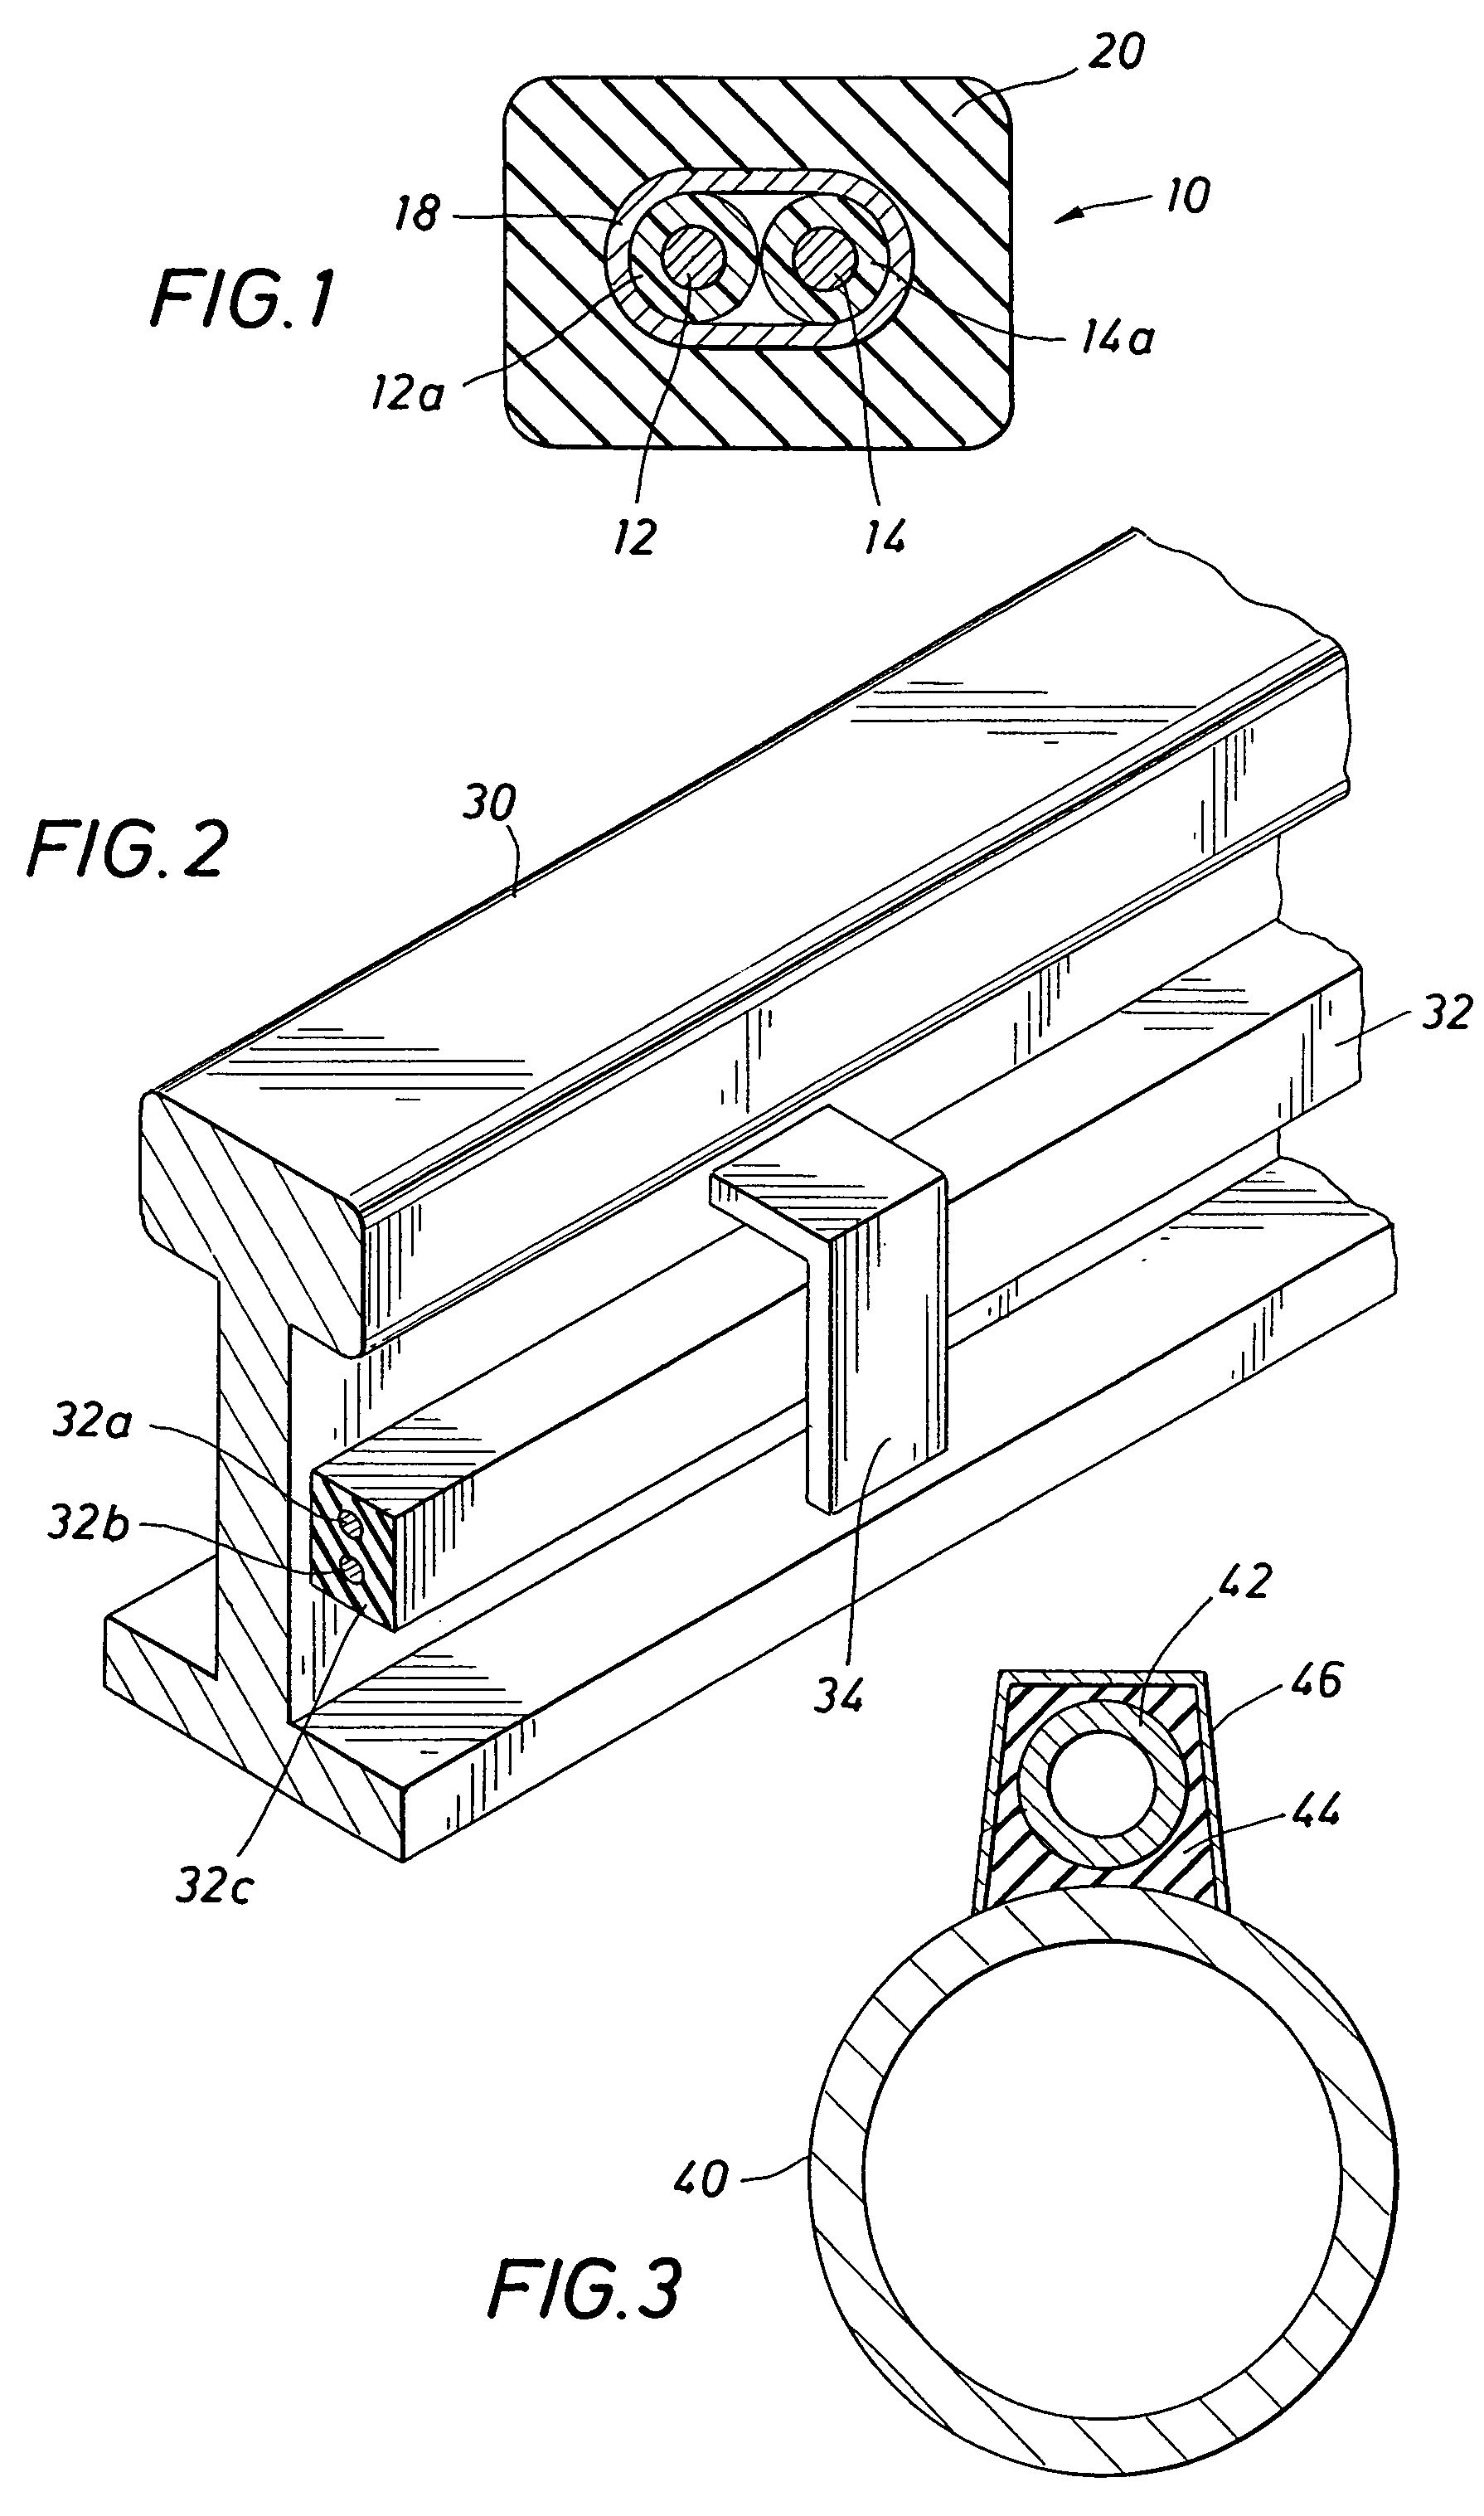 Thermally-conductive, electrically non-conductive heat transfer material and articles made thereof